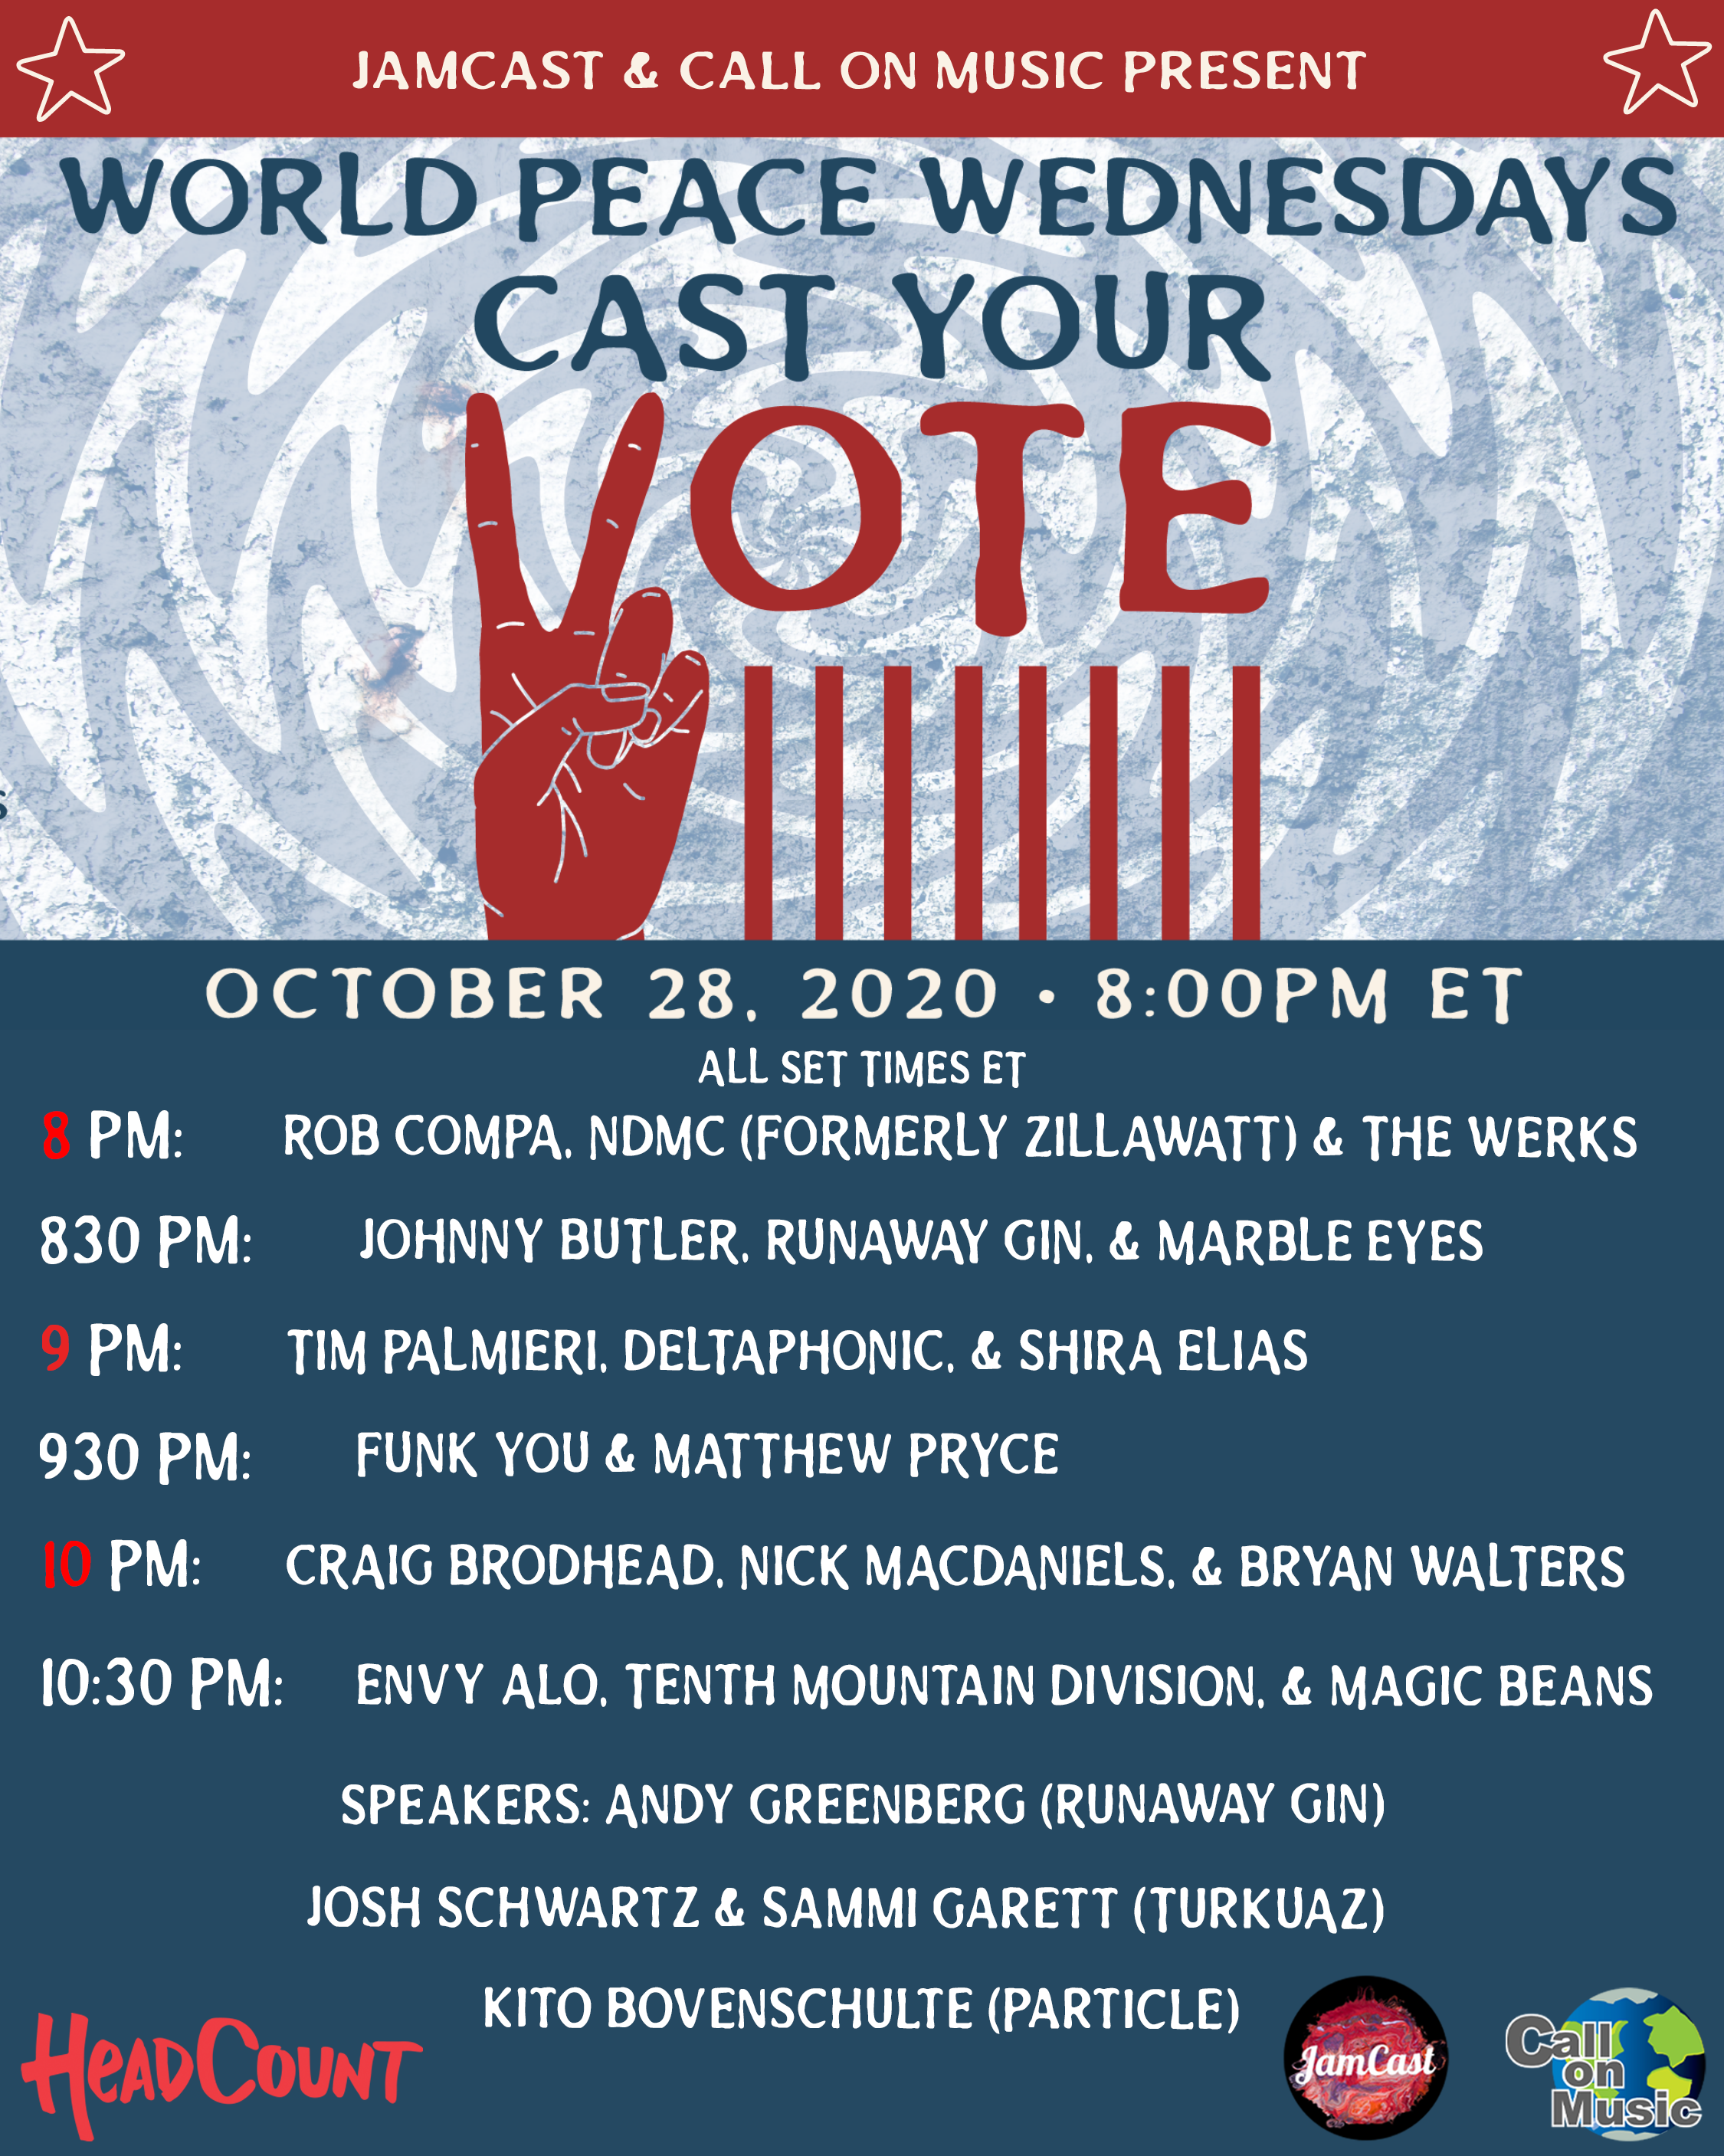 JamCast Network & Call On Music Present: Cast Your Vote Livestream